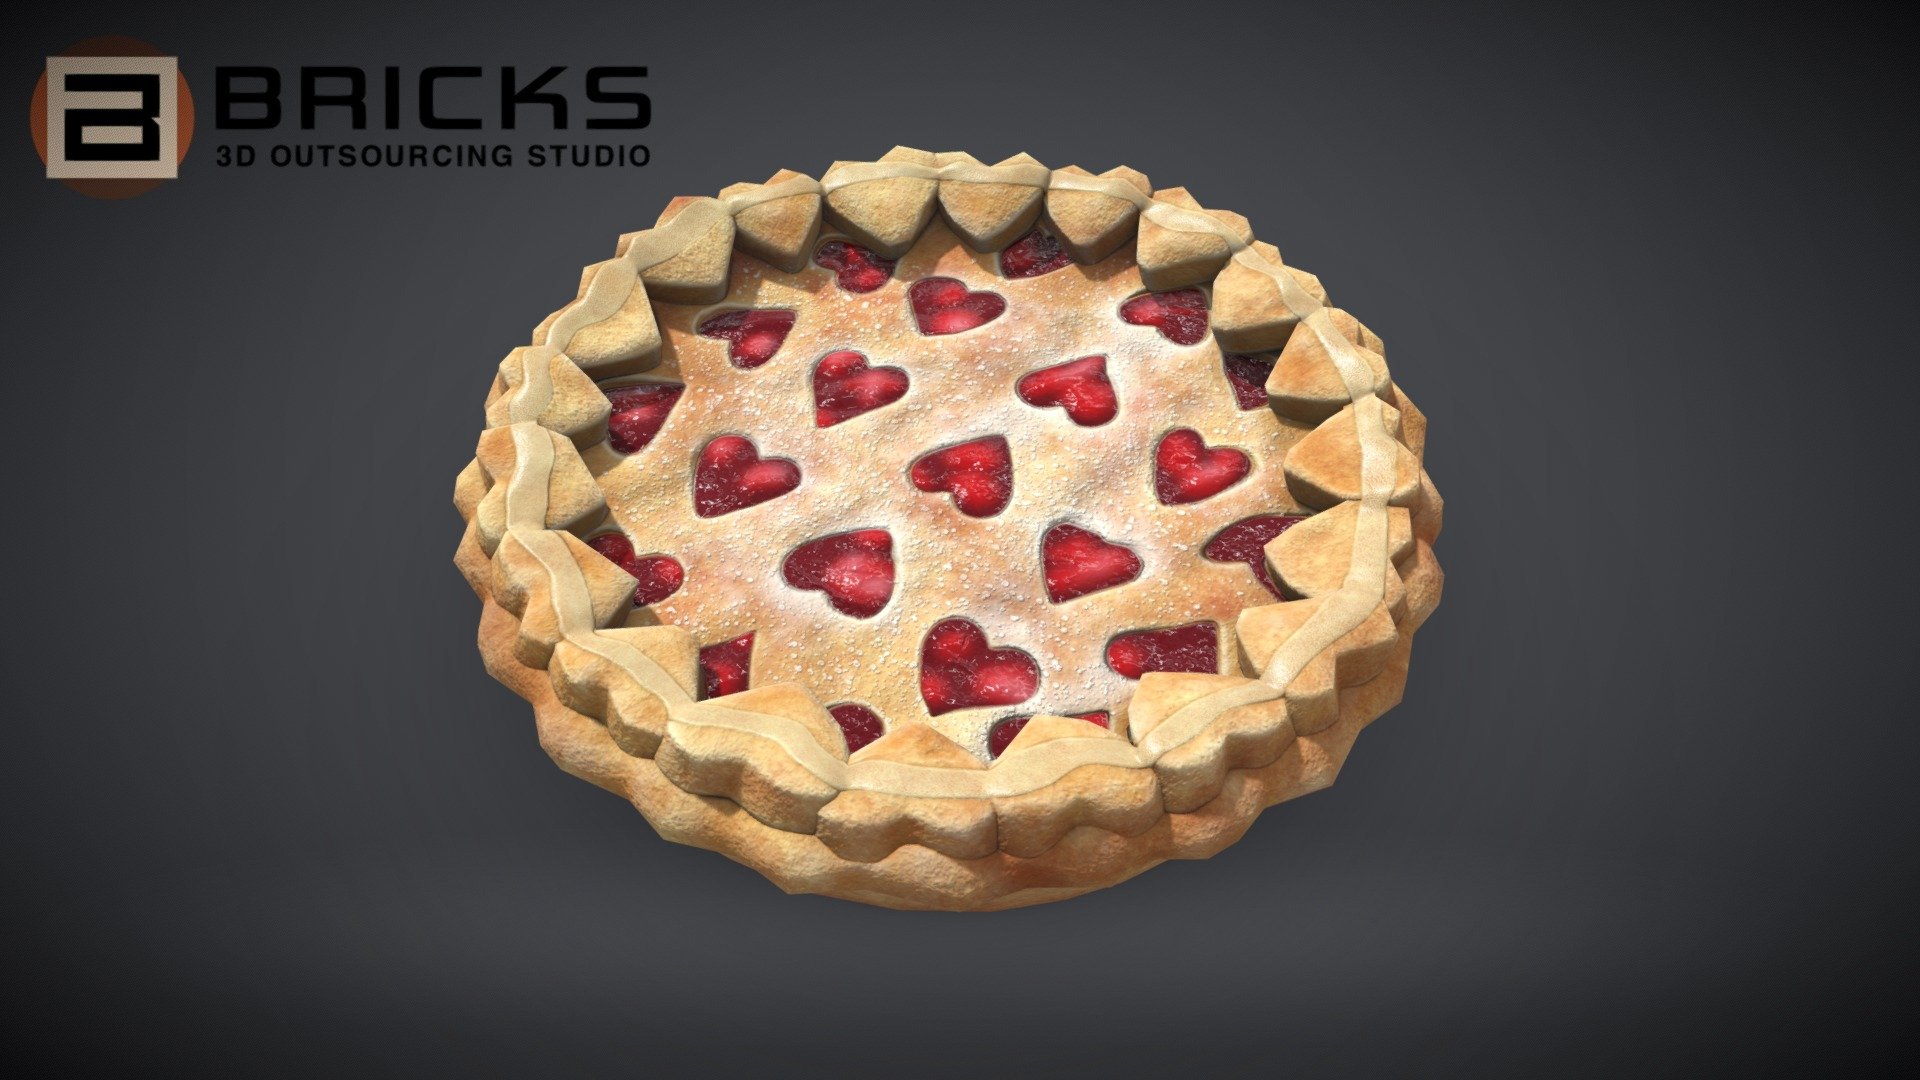 PBR Food Asset:
PieStrawberryHeart
Polycount: 1546
Vertex count: 775
Texture Size: 2048px x 2048px
Normal: OpenGL

If you need any adjust in file please contact us: team@bricks3dstudio.com

Hire us: tringuyen@bricks3dstudio.com
Here is us: https://www.bricks3dstudio.com/
        https://www.artstation.com/bricksstudio
        https://www.facebook.com/Bricks3dstudio/
        https://www.linkedin.com/in/bricks-studio-b10462252/ - PieStrawberryHeart - Buy Royalty Free 3D model by Bricks Studio (@bricks3dstudio) 3d model